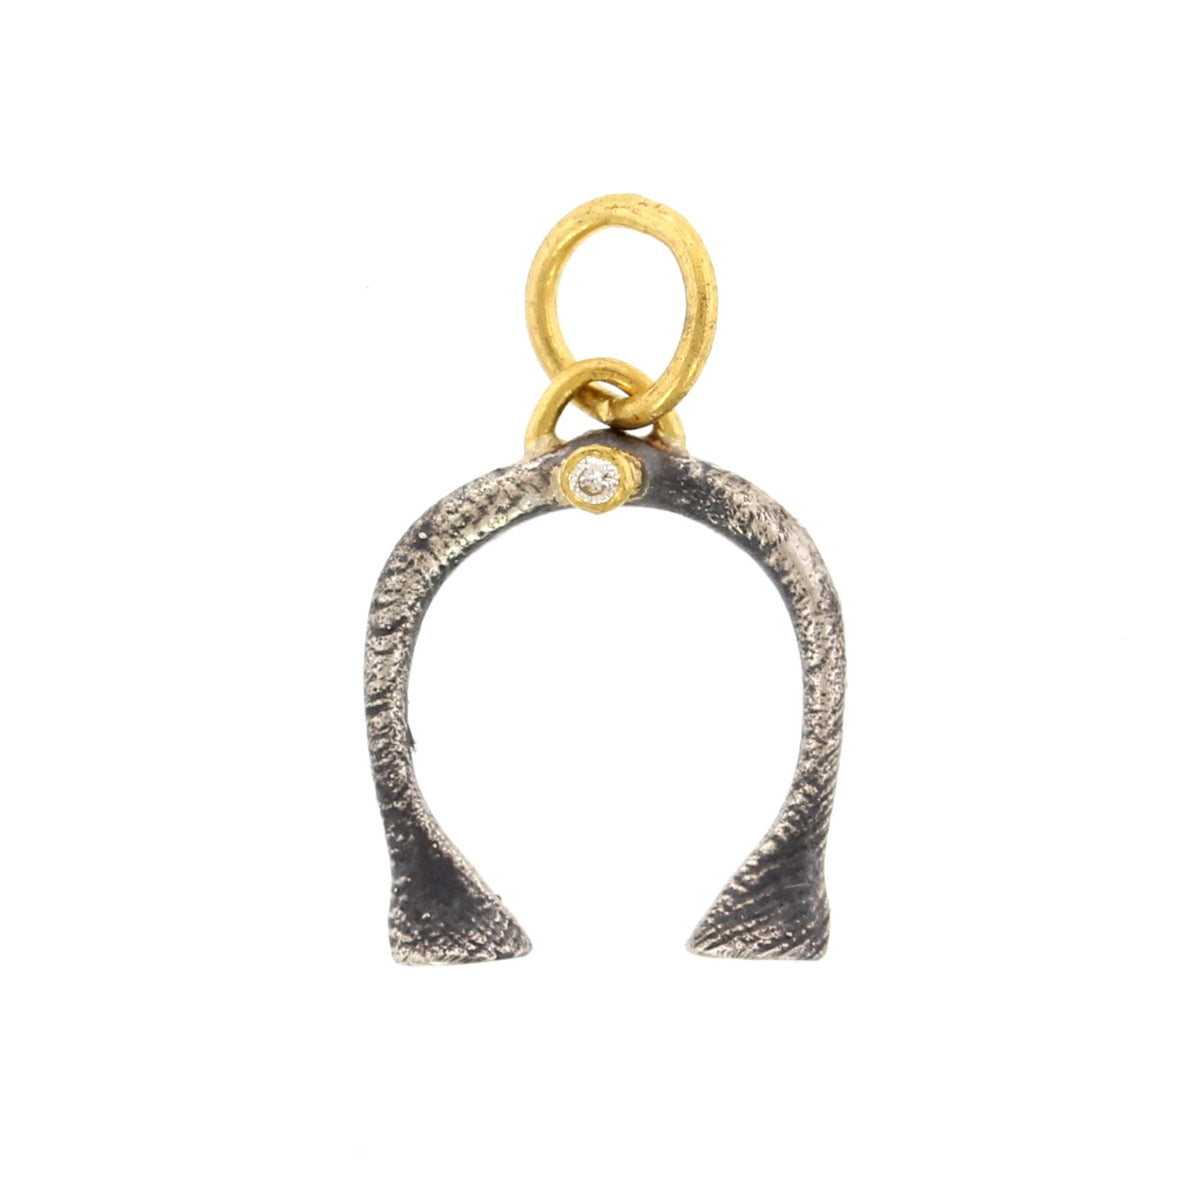 24K Yellow Gold and Sterling Silver Horse Shoe Charm